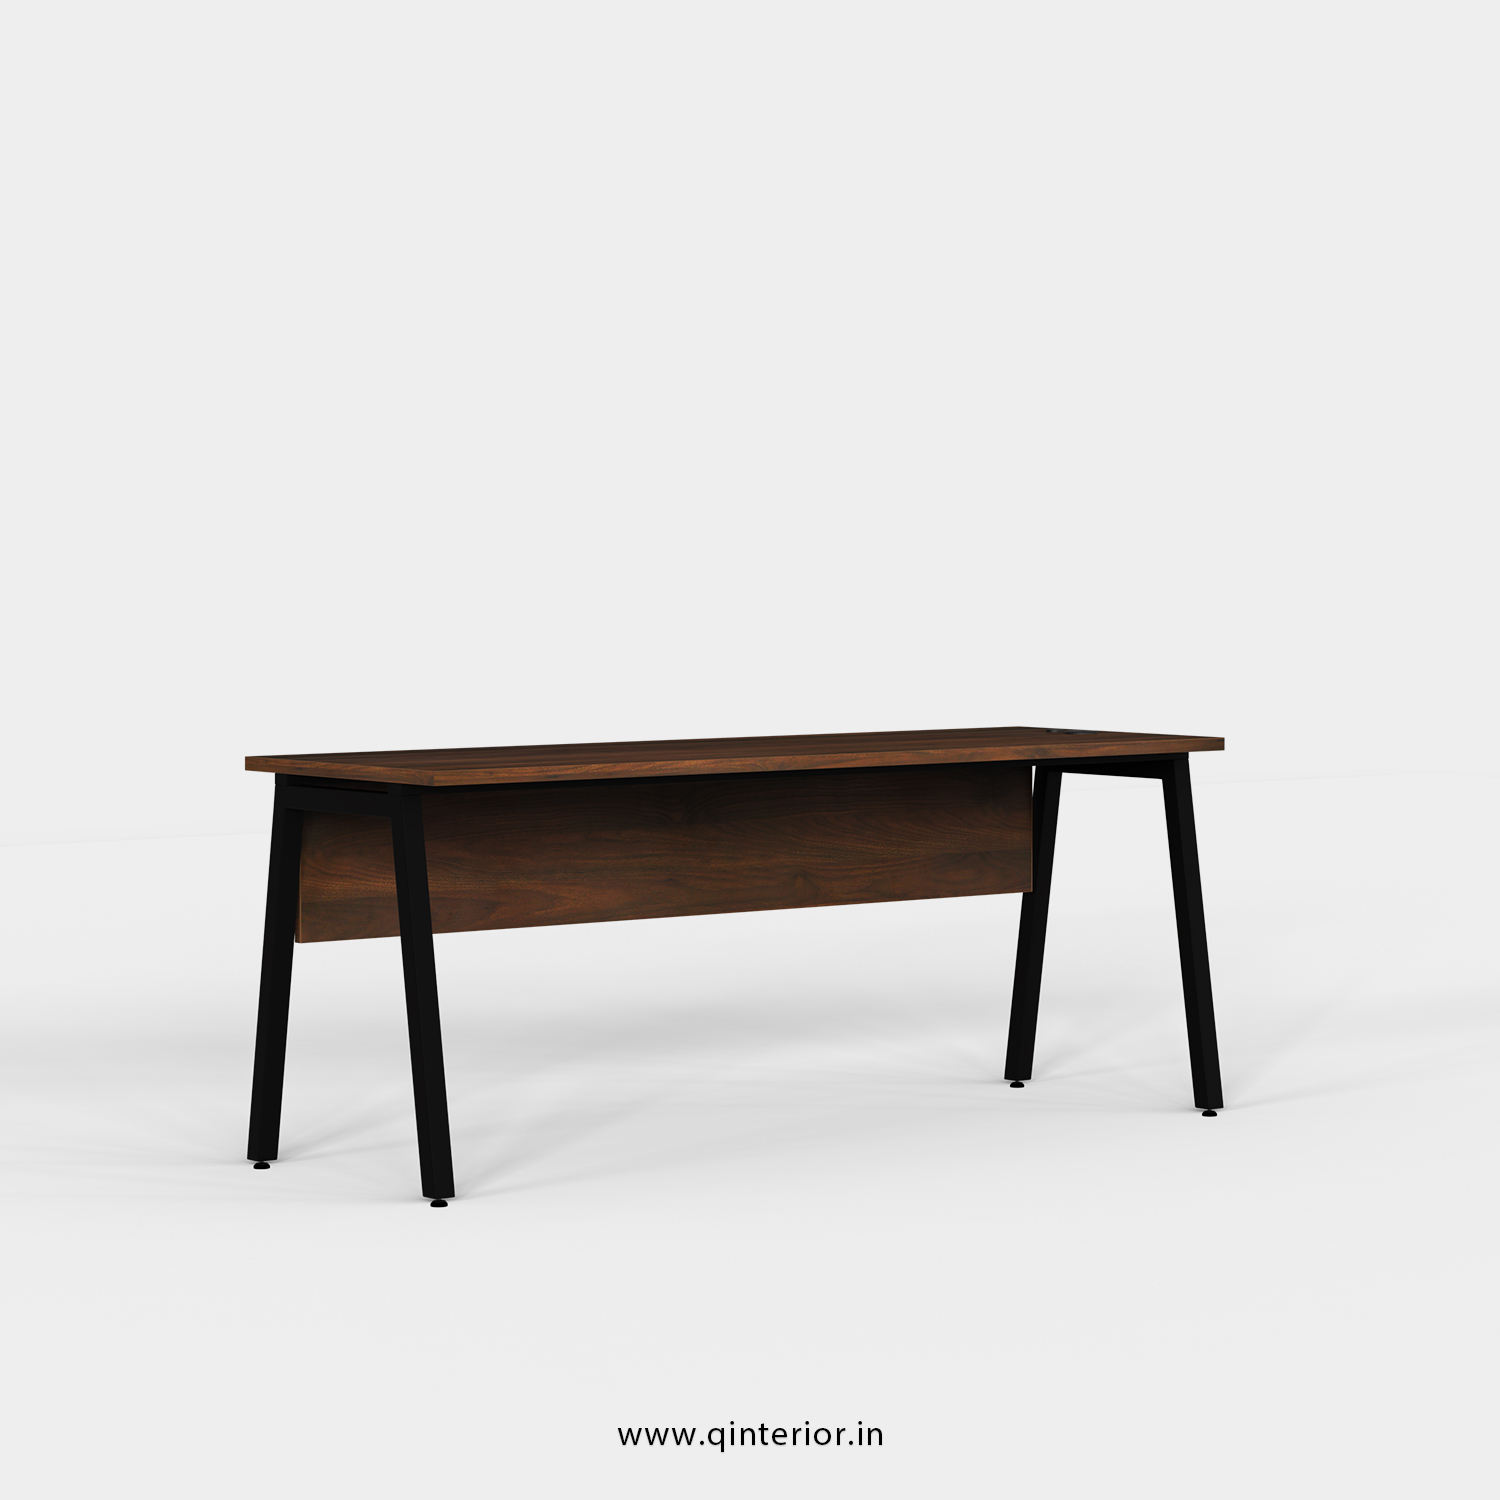 Berg Executive Table in Walnut Finish - OET001 C1